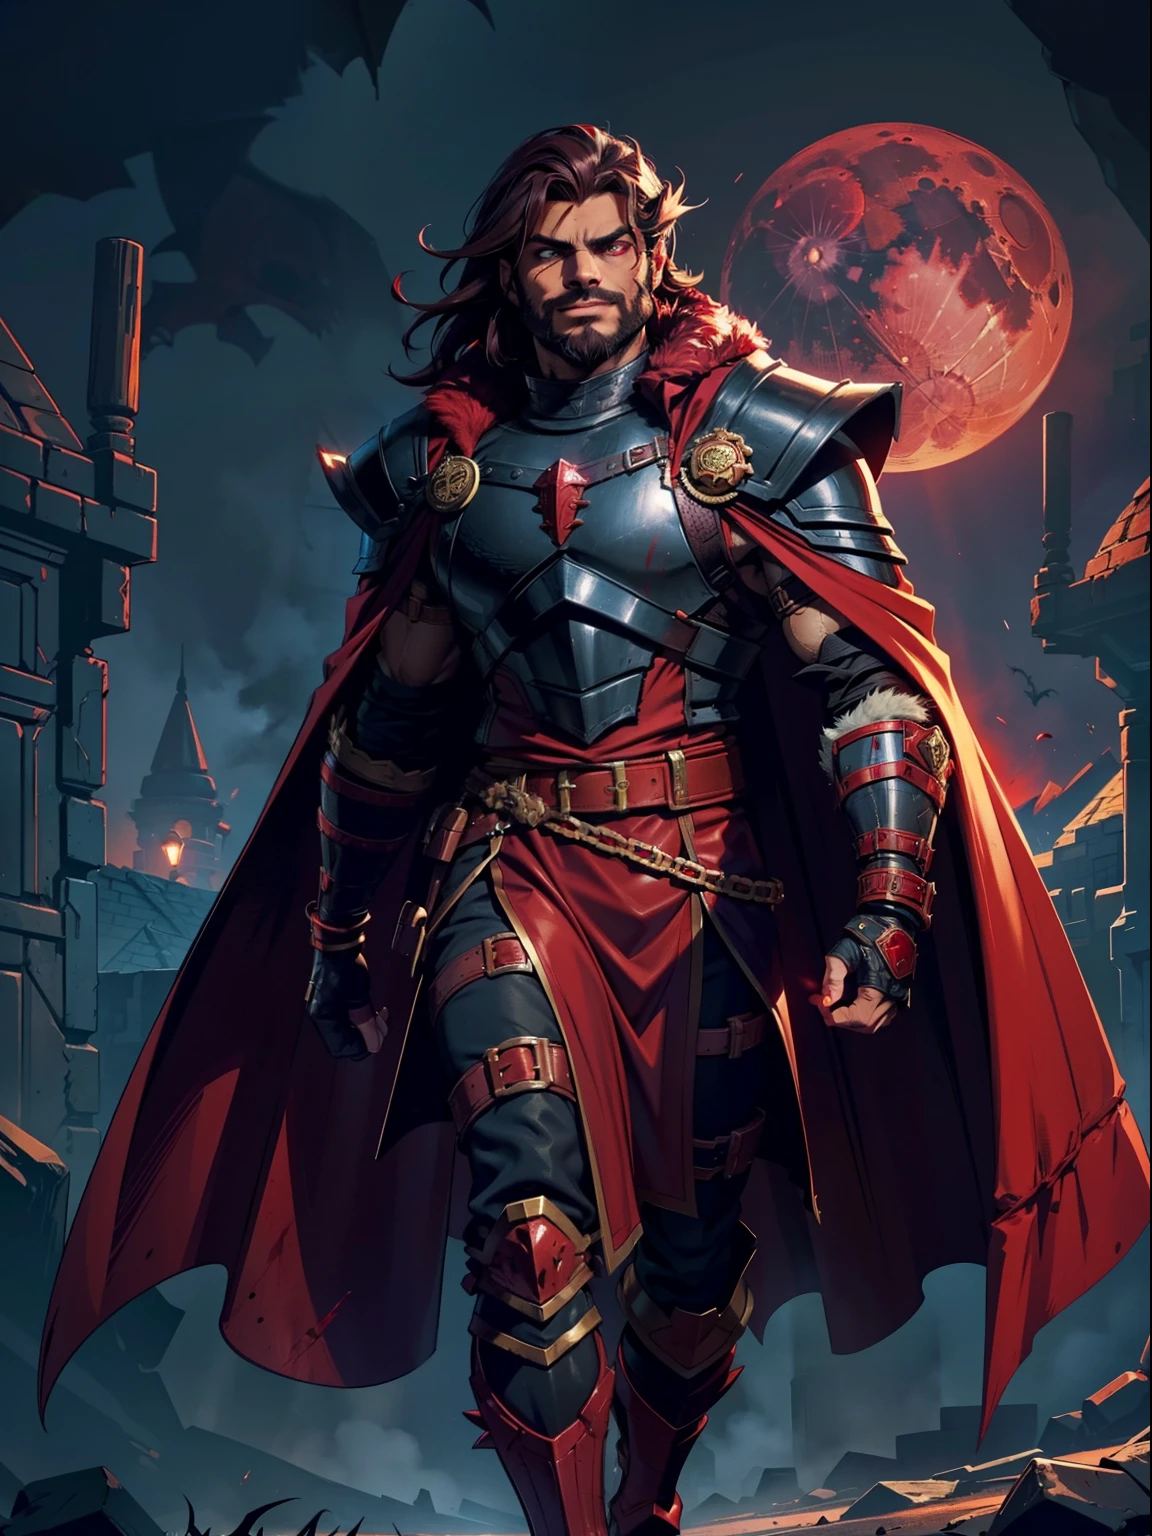 Dark night blood moon background, Darkest Dungeon style, walking. Sadurang from Marvel, hunk, buffed physics, short mane hair, mullet, defined face, detailed eyes, short beard, glowing red eyes, dark hair, wily smile, badass, dangerous. Wearing full red armor with dragon scales, cape of furs.